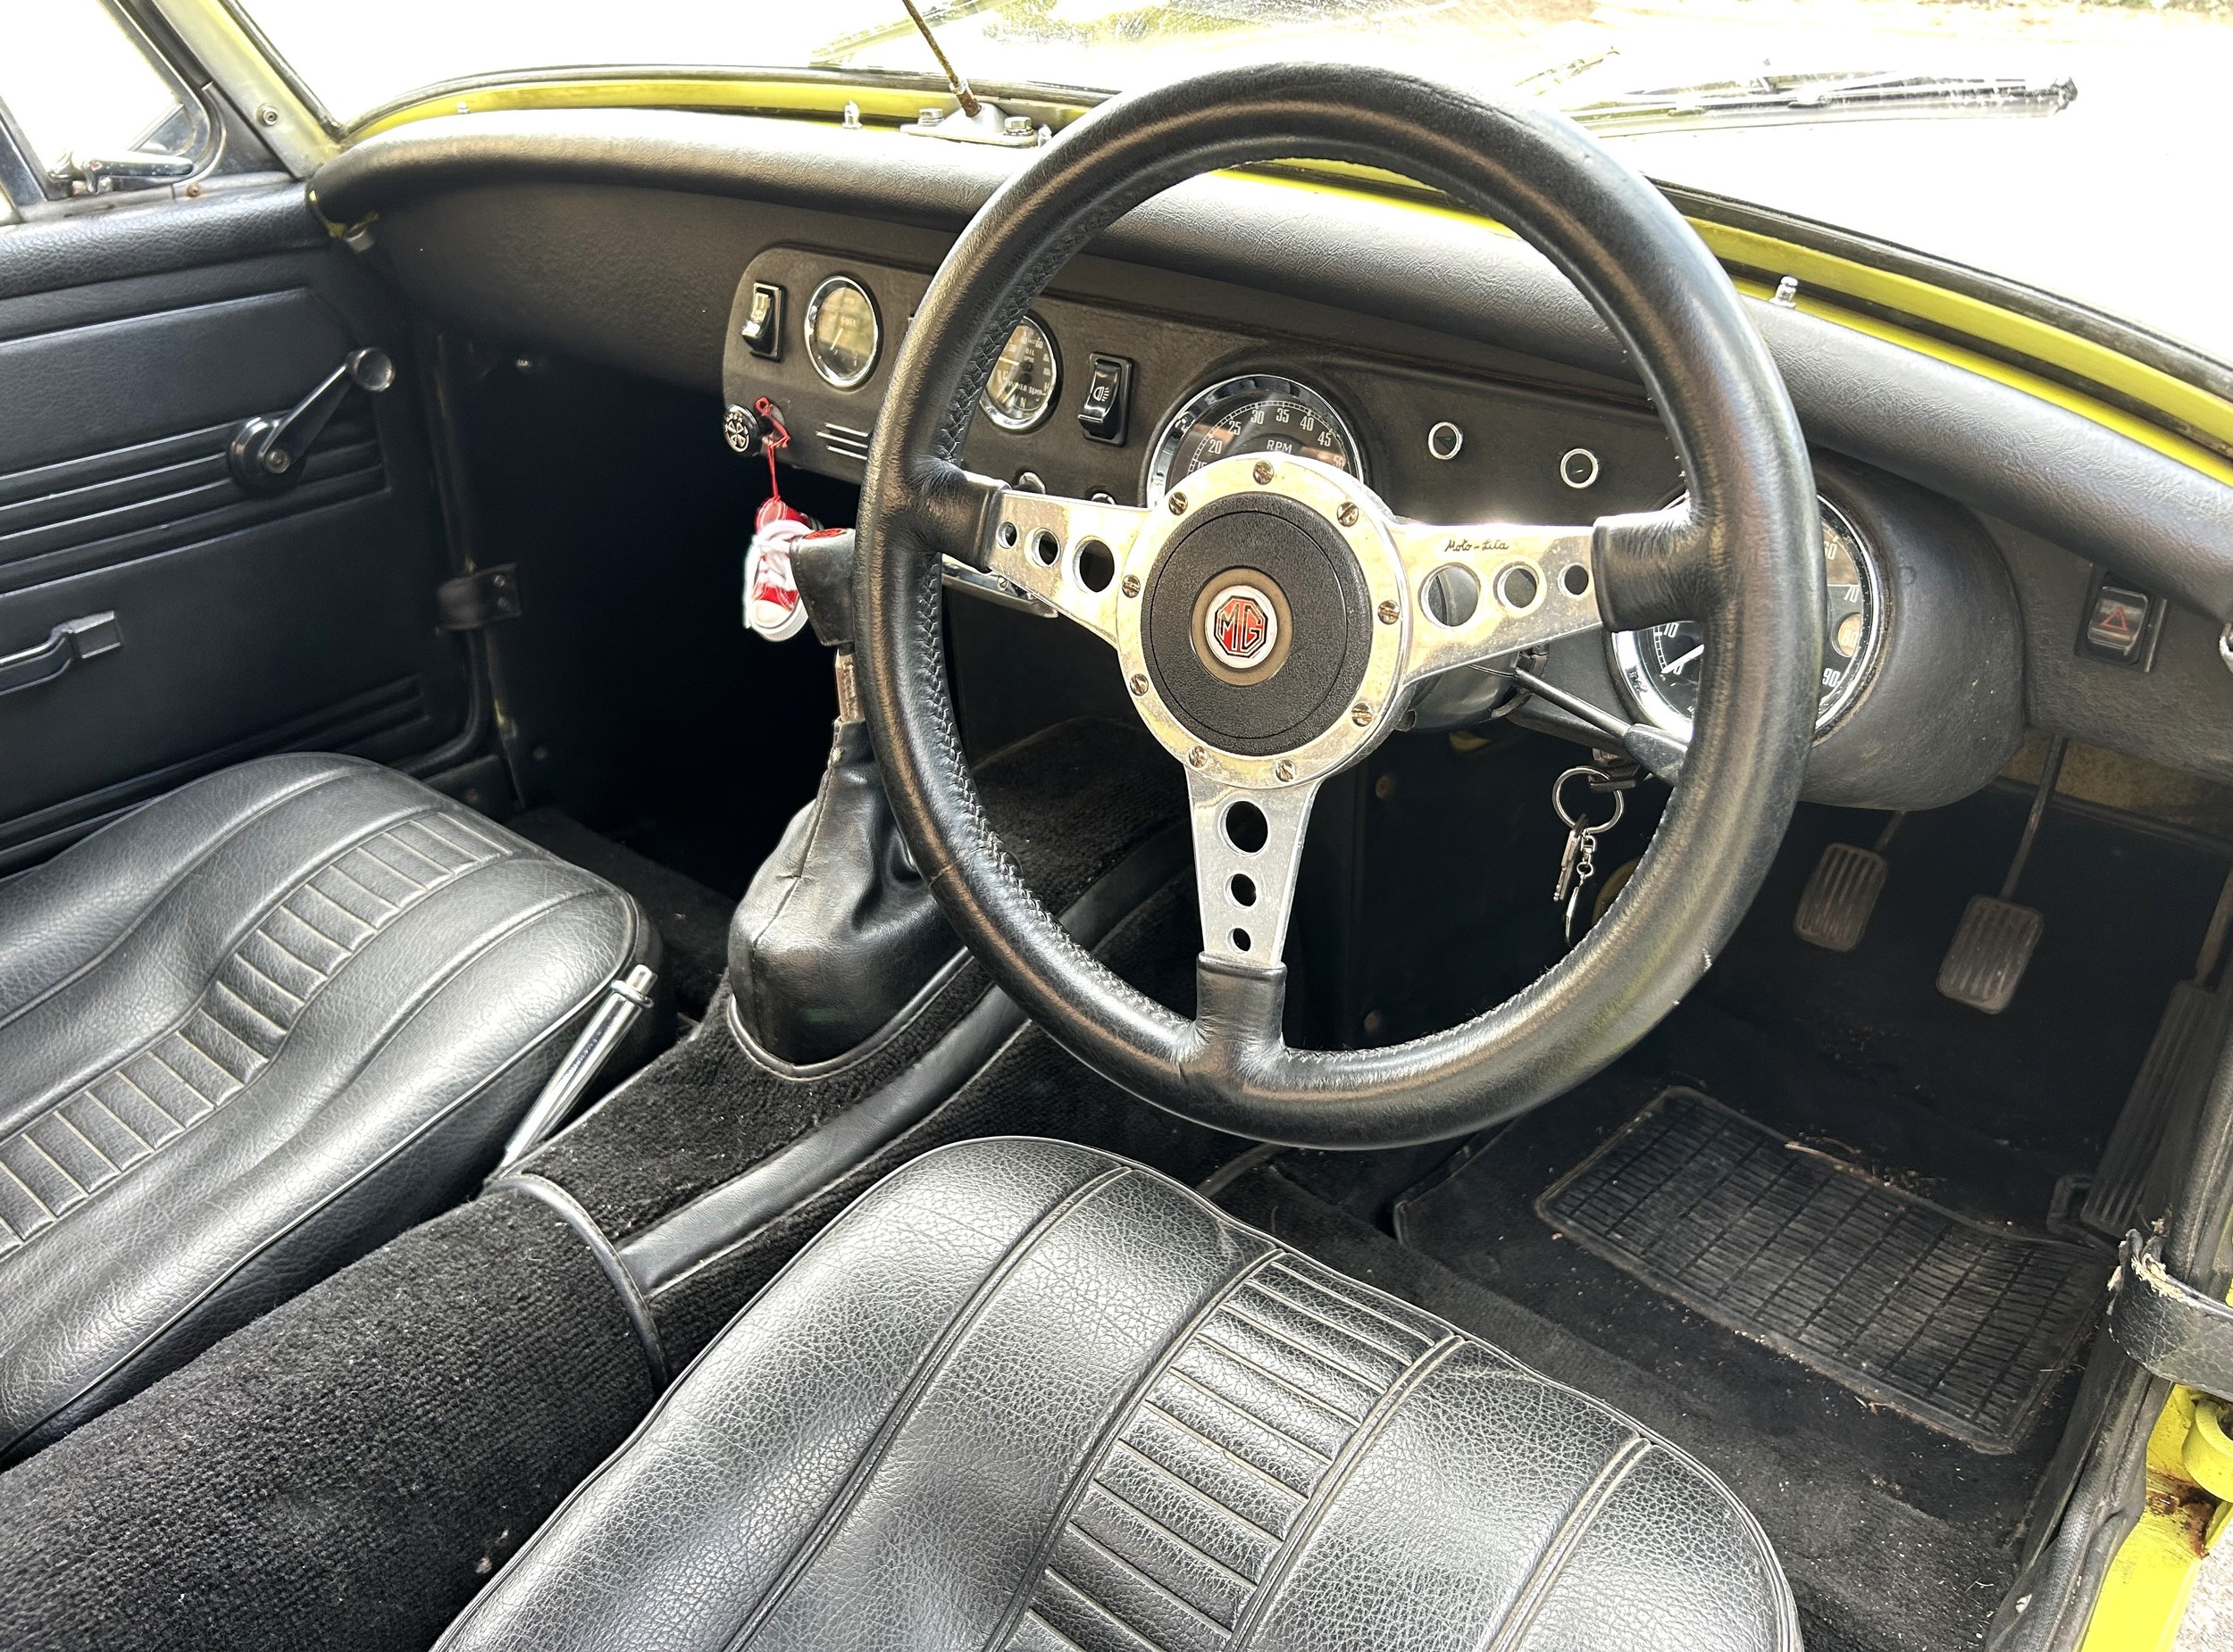 1974 MG MIDGET Registration Number: PVV 294N Chassis Number: G-AN5/147935-G Recorded Mileage: c.16, - Image 8 of 13